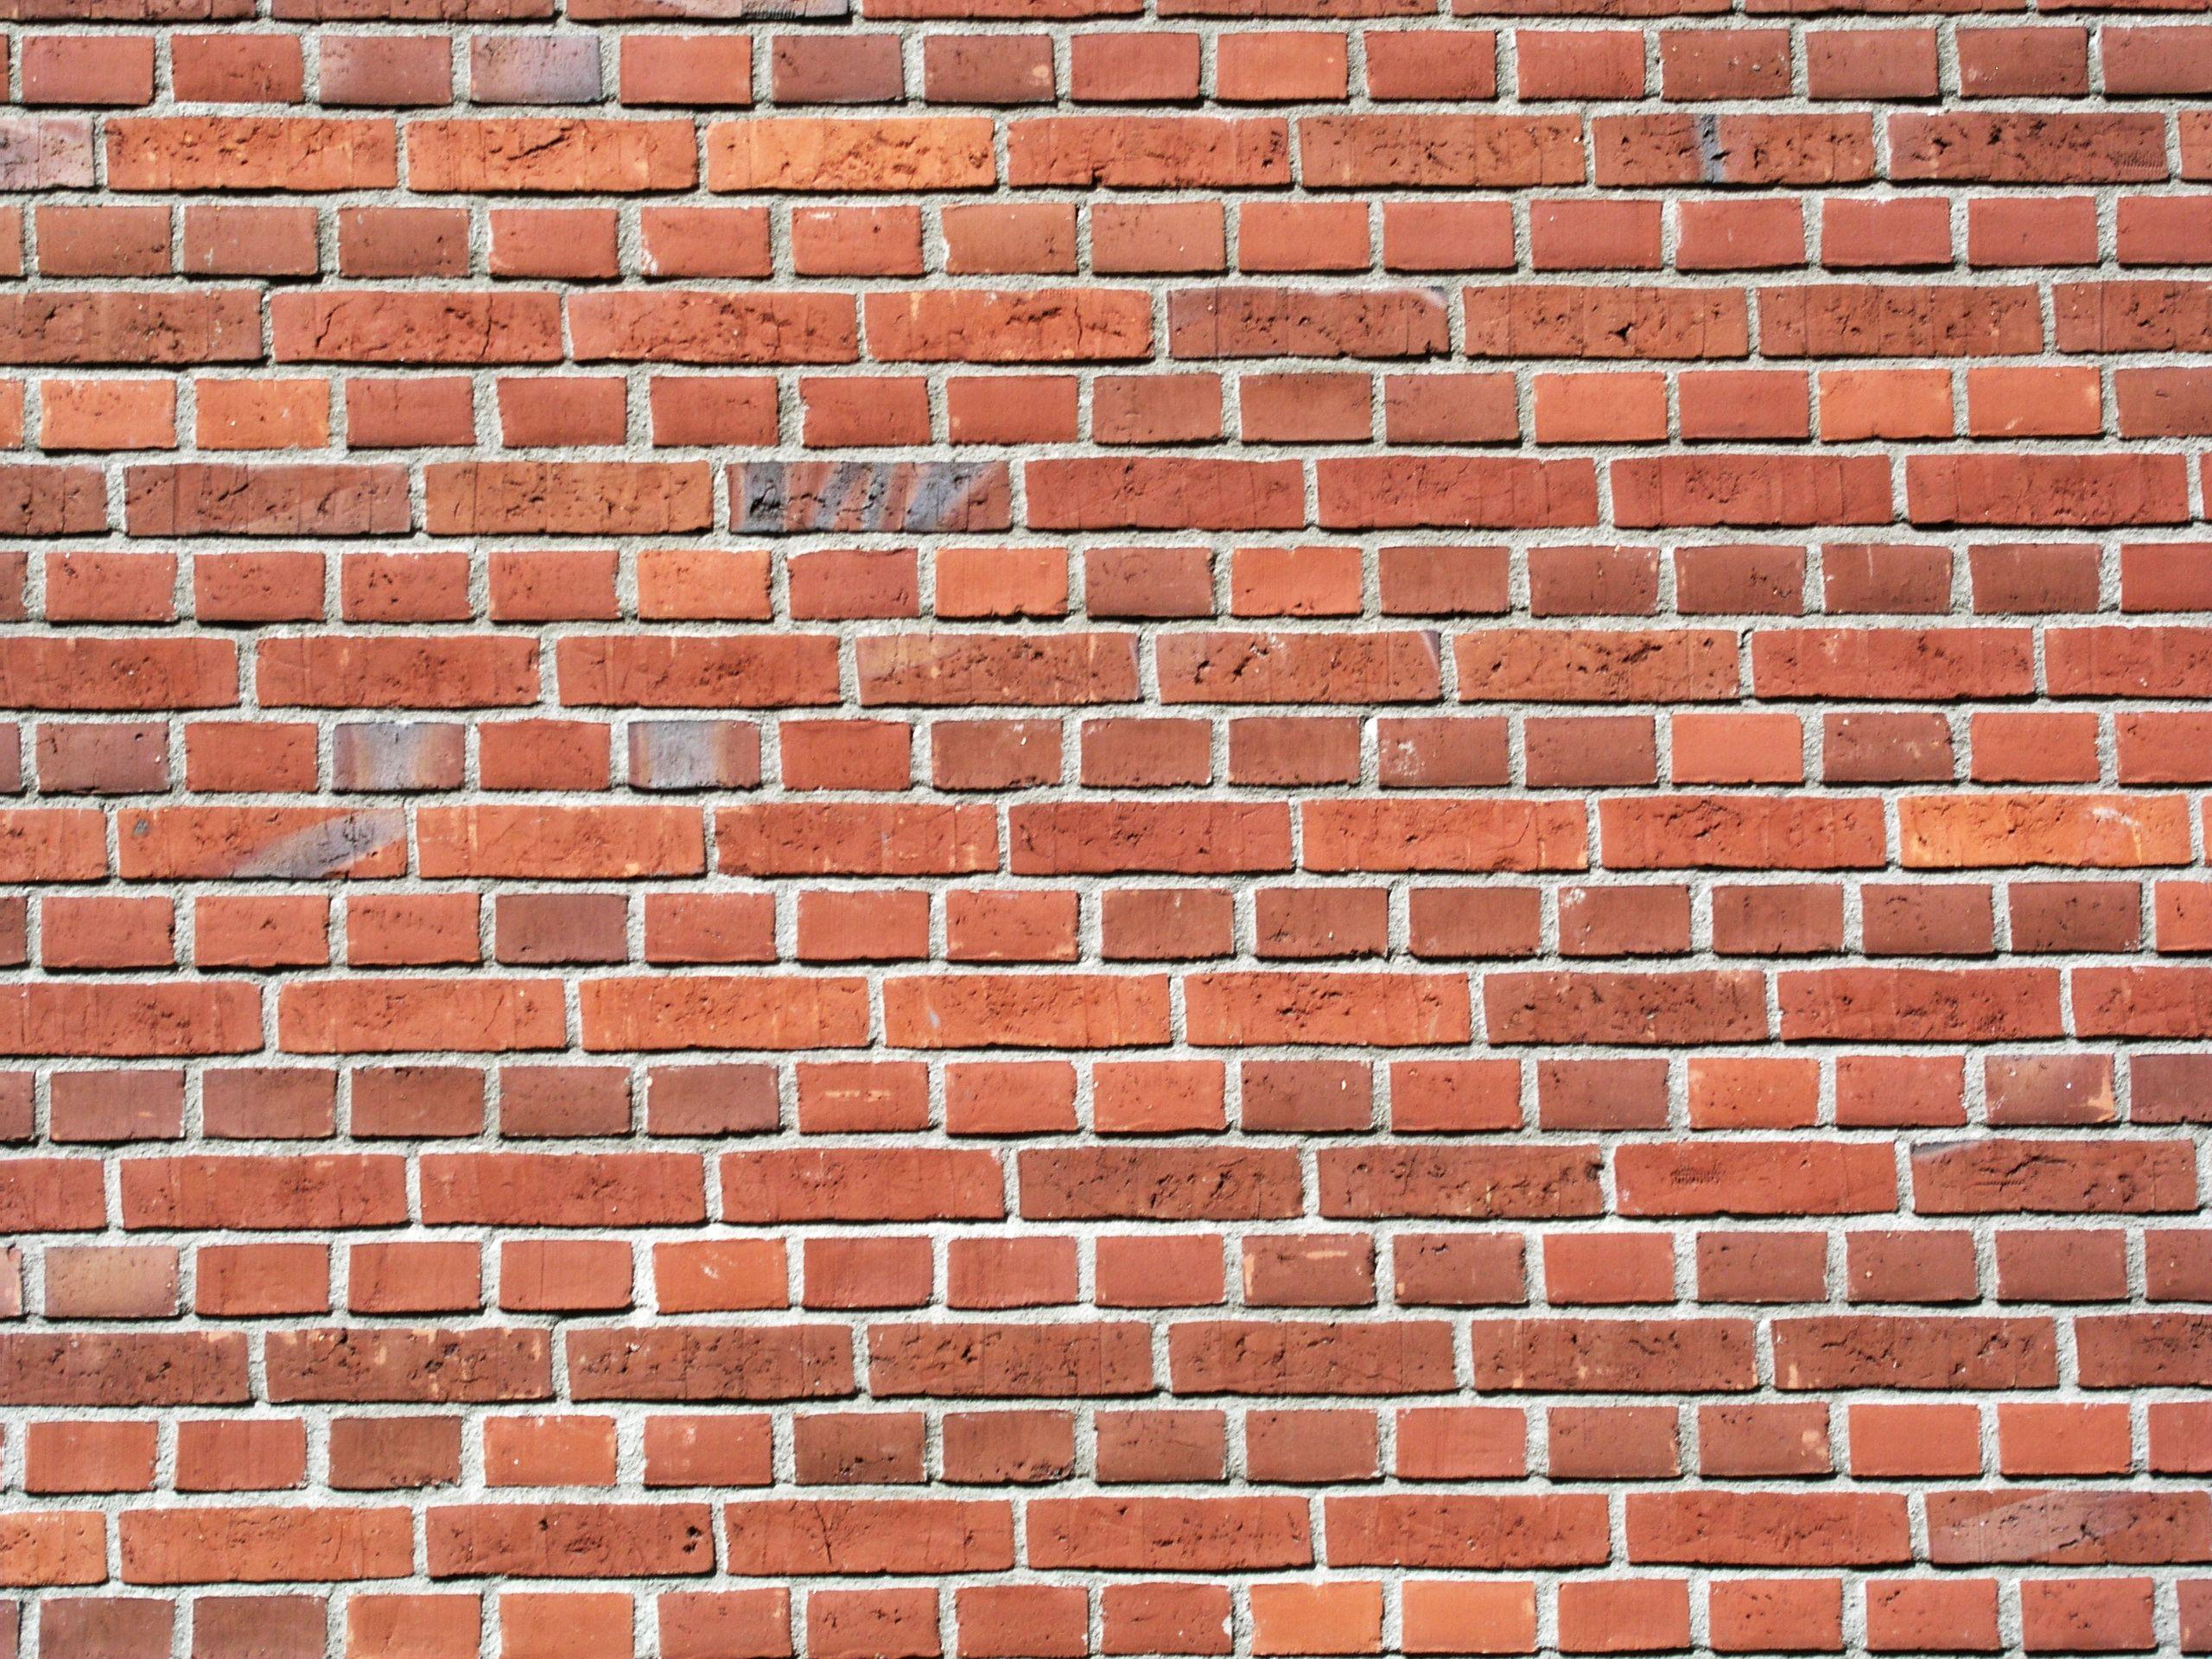 Android Wallpaper: Another Brick in the Wall